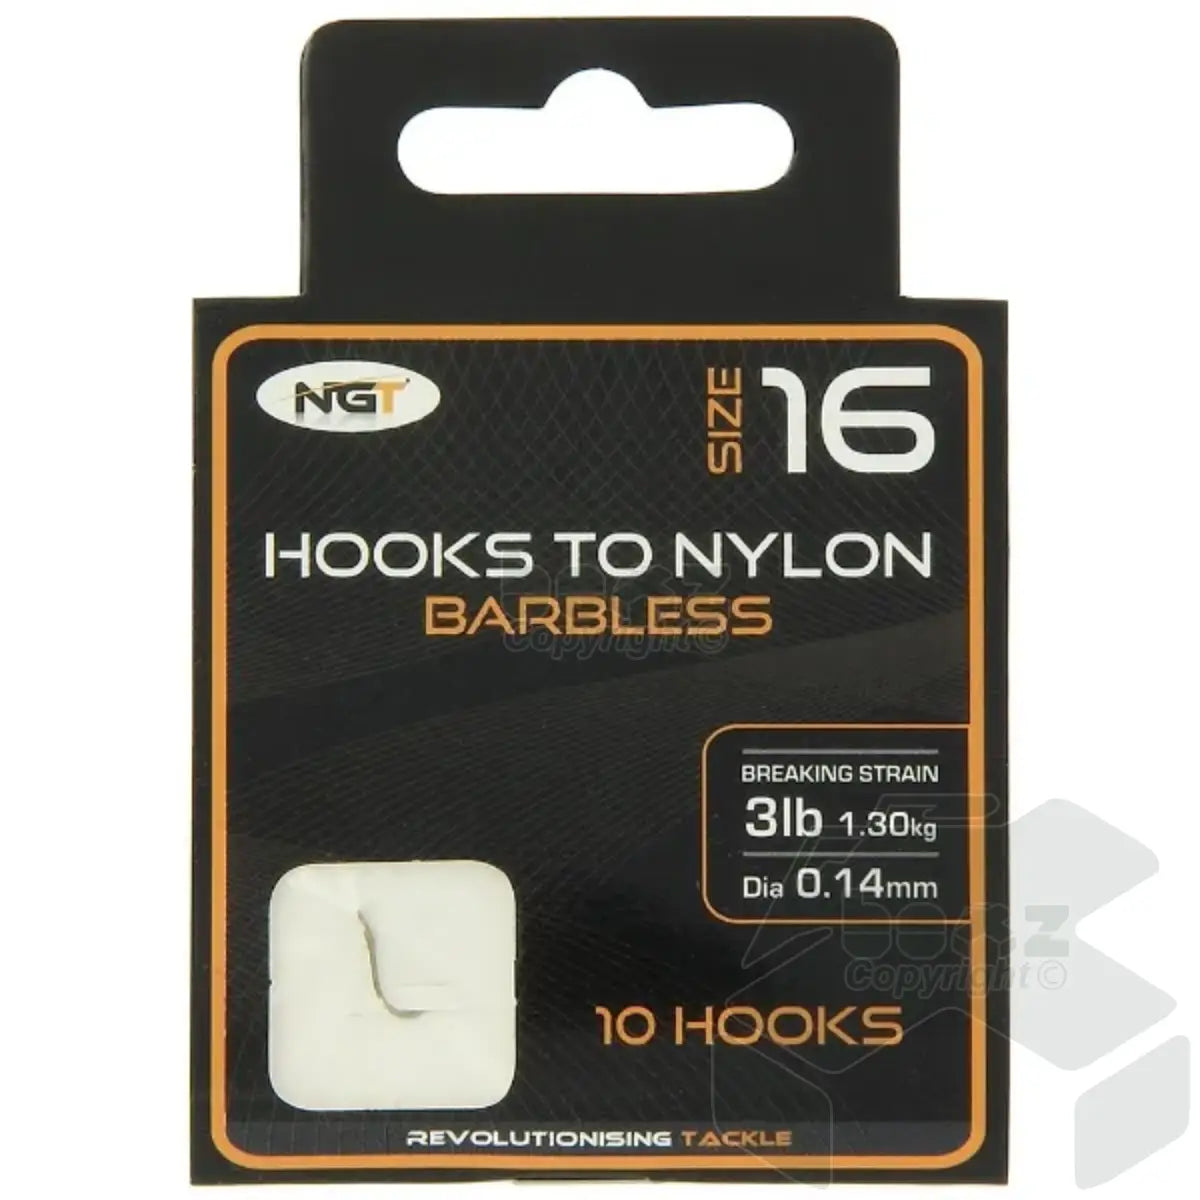 NGT 10 Barbless Hooks To Nylon - Size 16